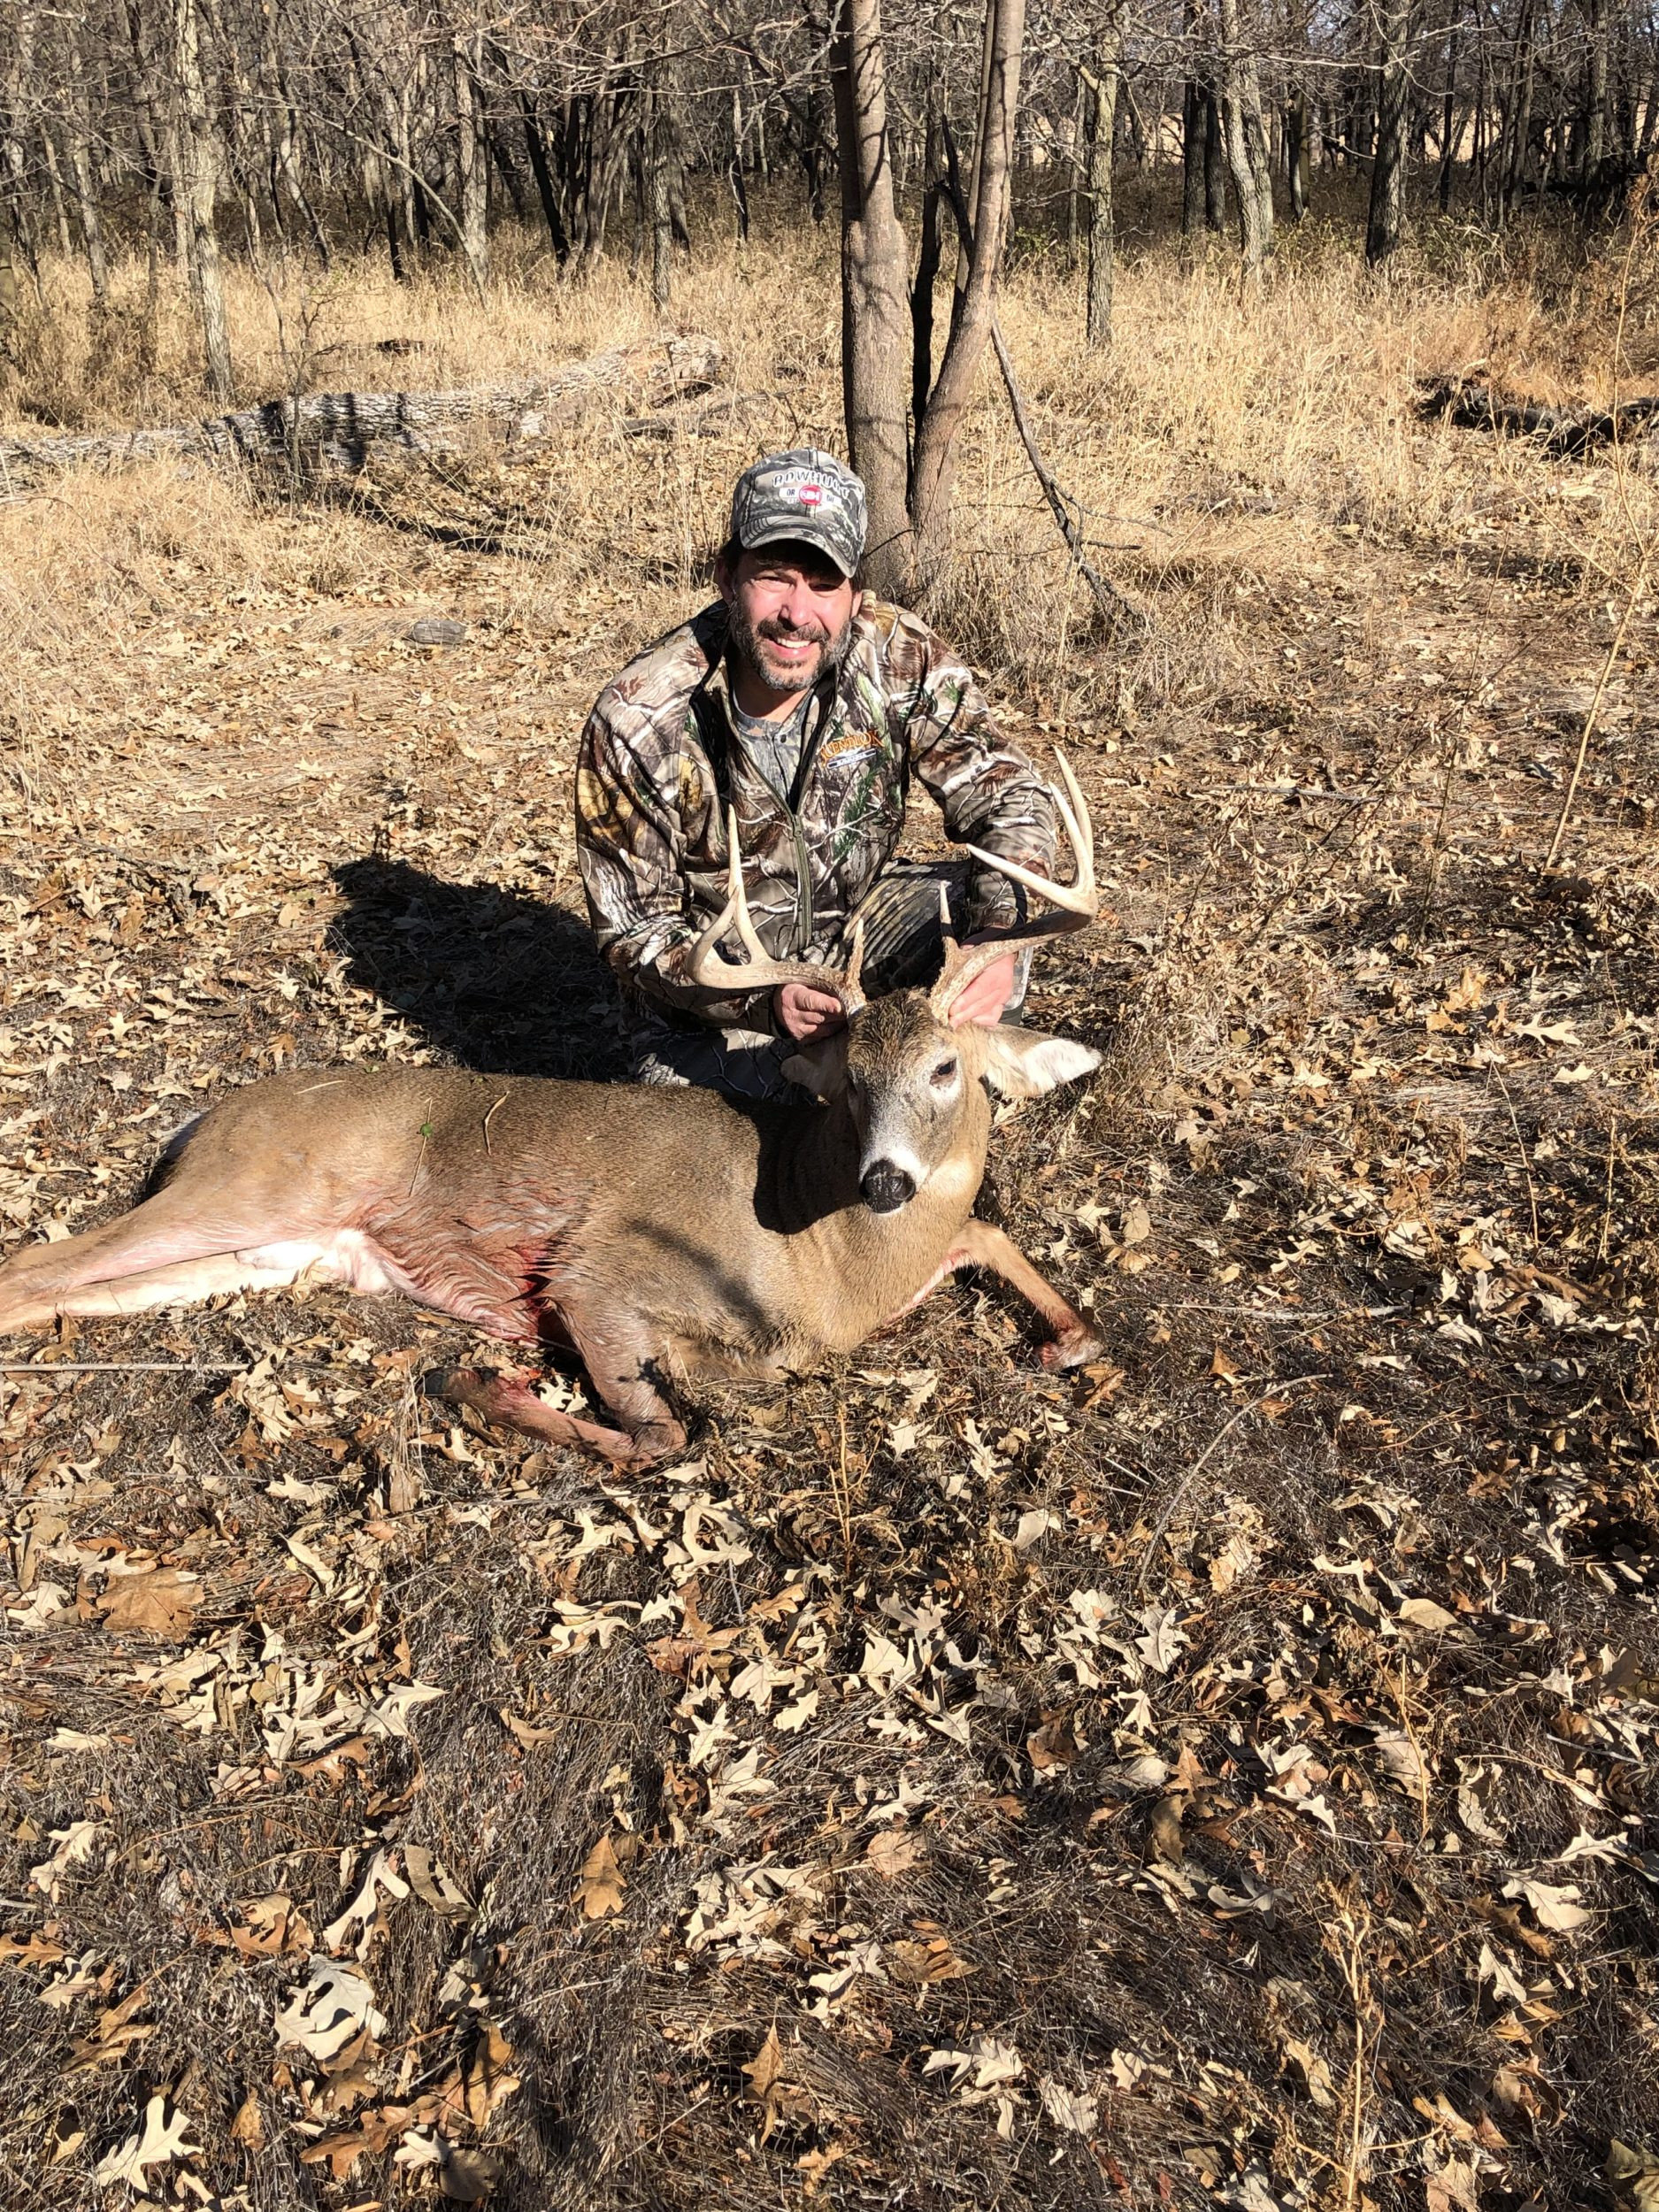 Whitetail In Russell, Kansasshane Cota | Bowhunting  2021 Peak Whitetail Deer In North Central Wisconsin